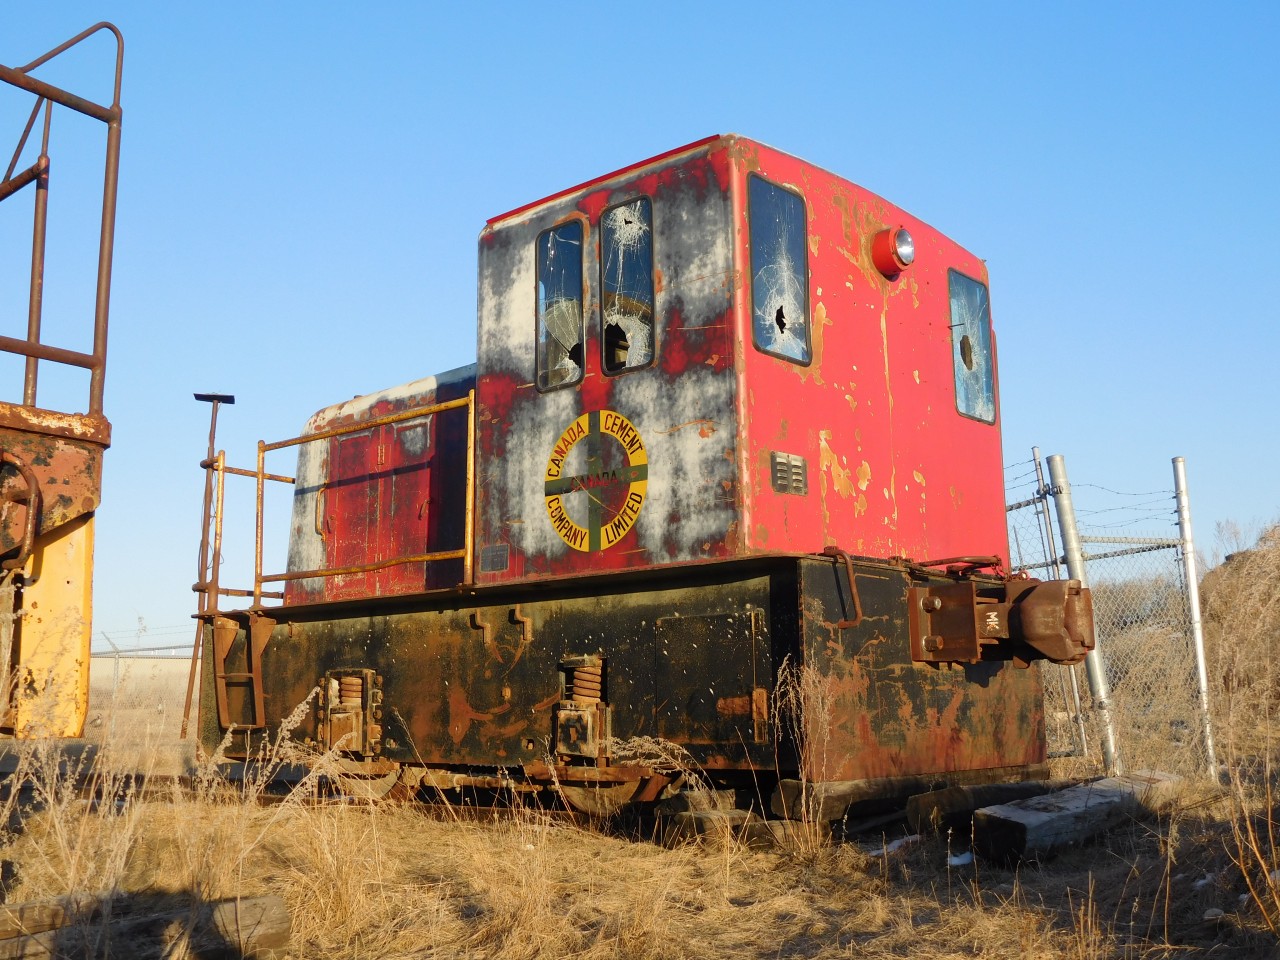 A Canada Cement red GE 15T is seen sitting in the Fort Garry industrial as it has for many years.